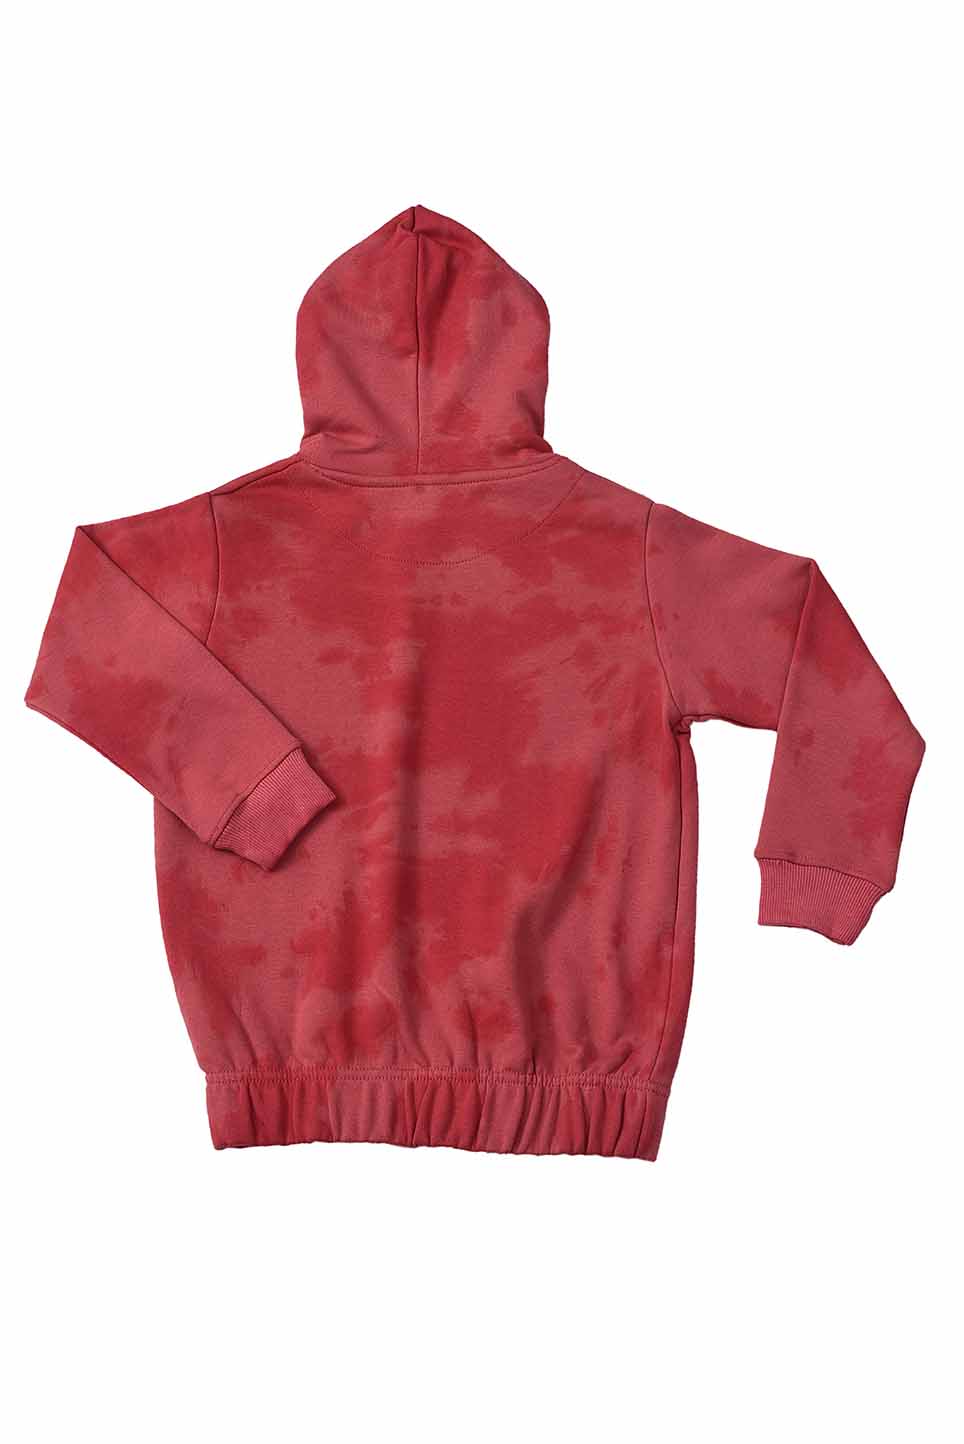 KDS-GC-12624 HOODED PULL OVER DUSTY ROSE